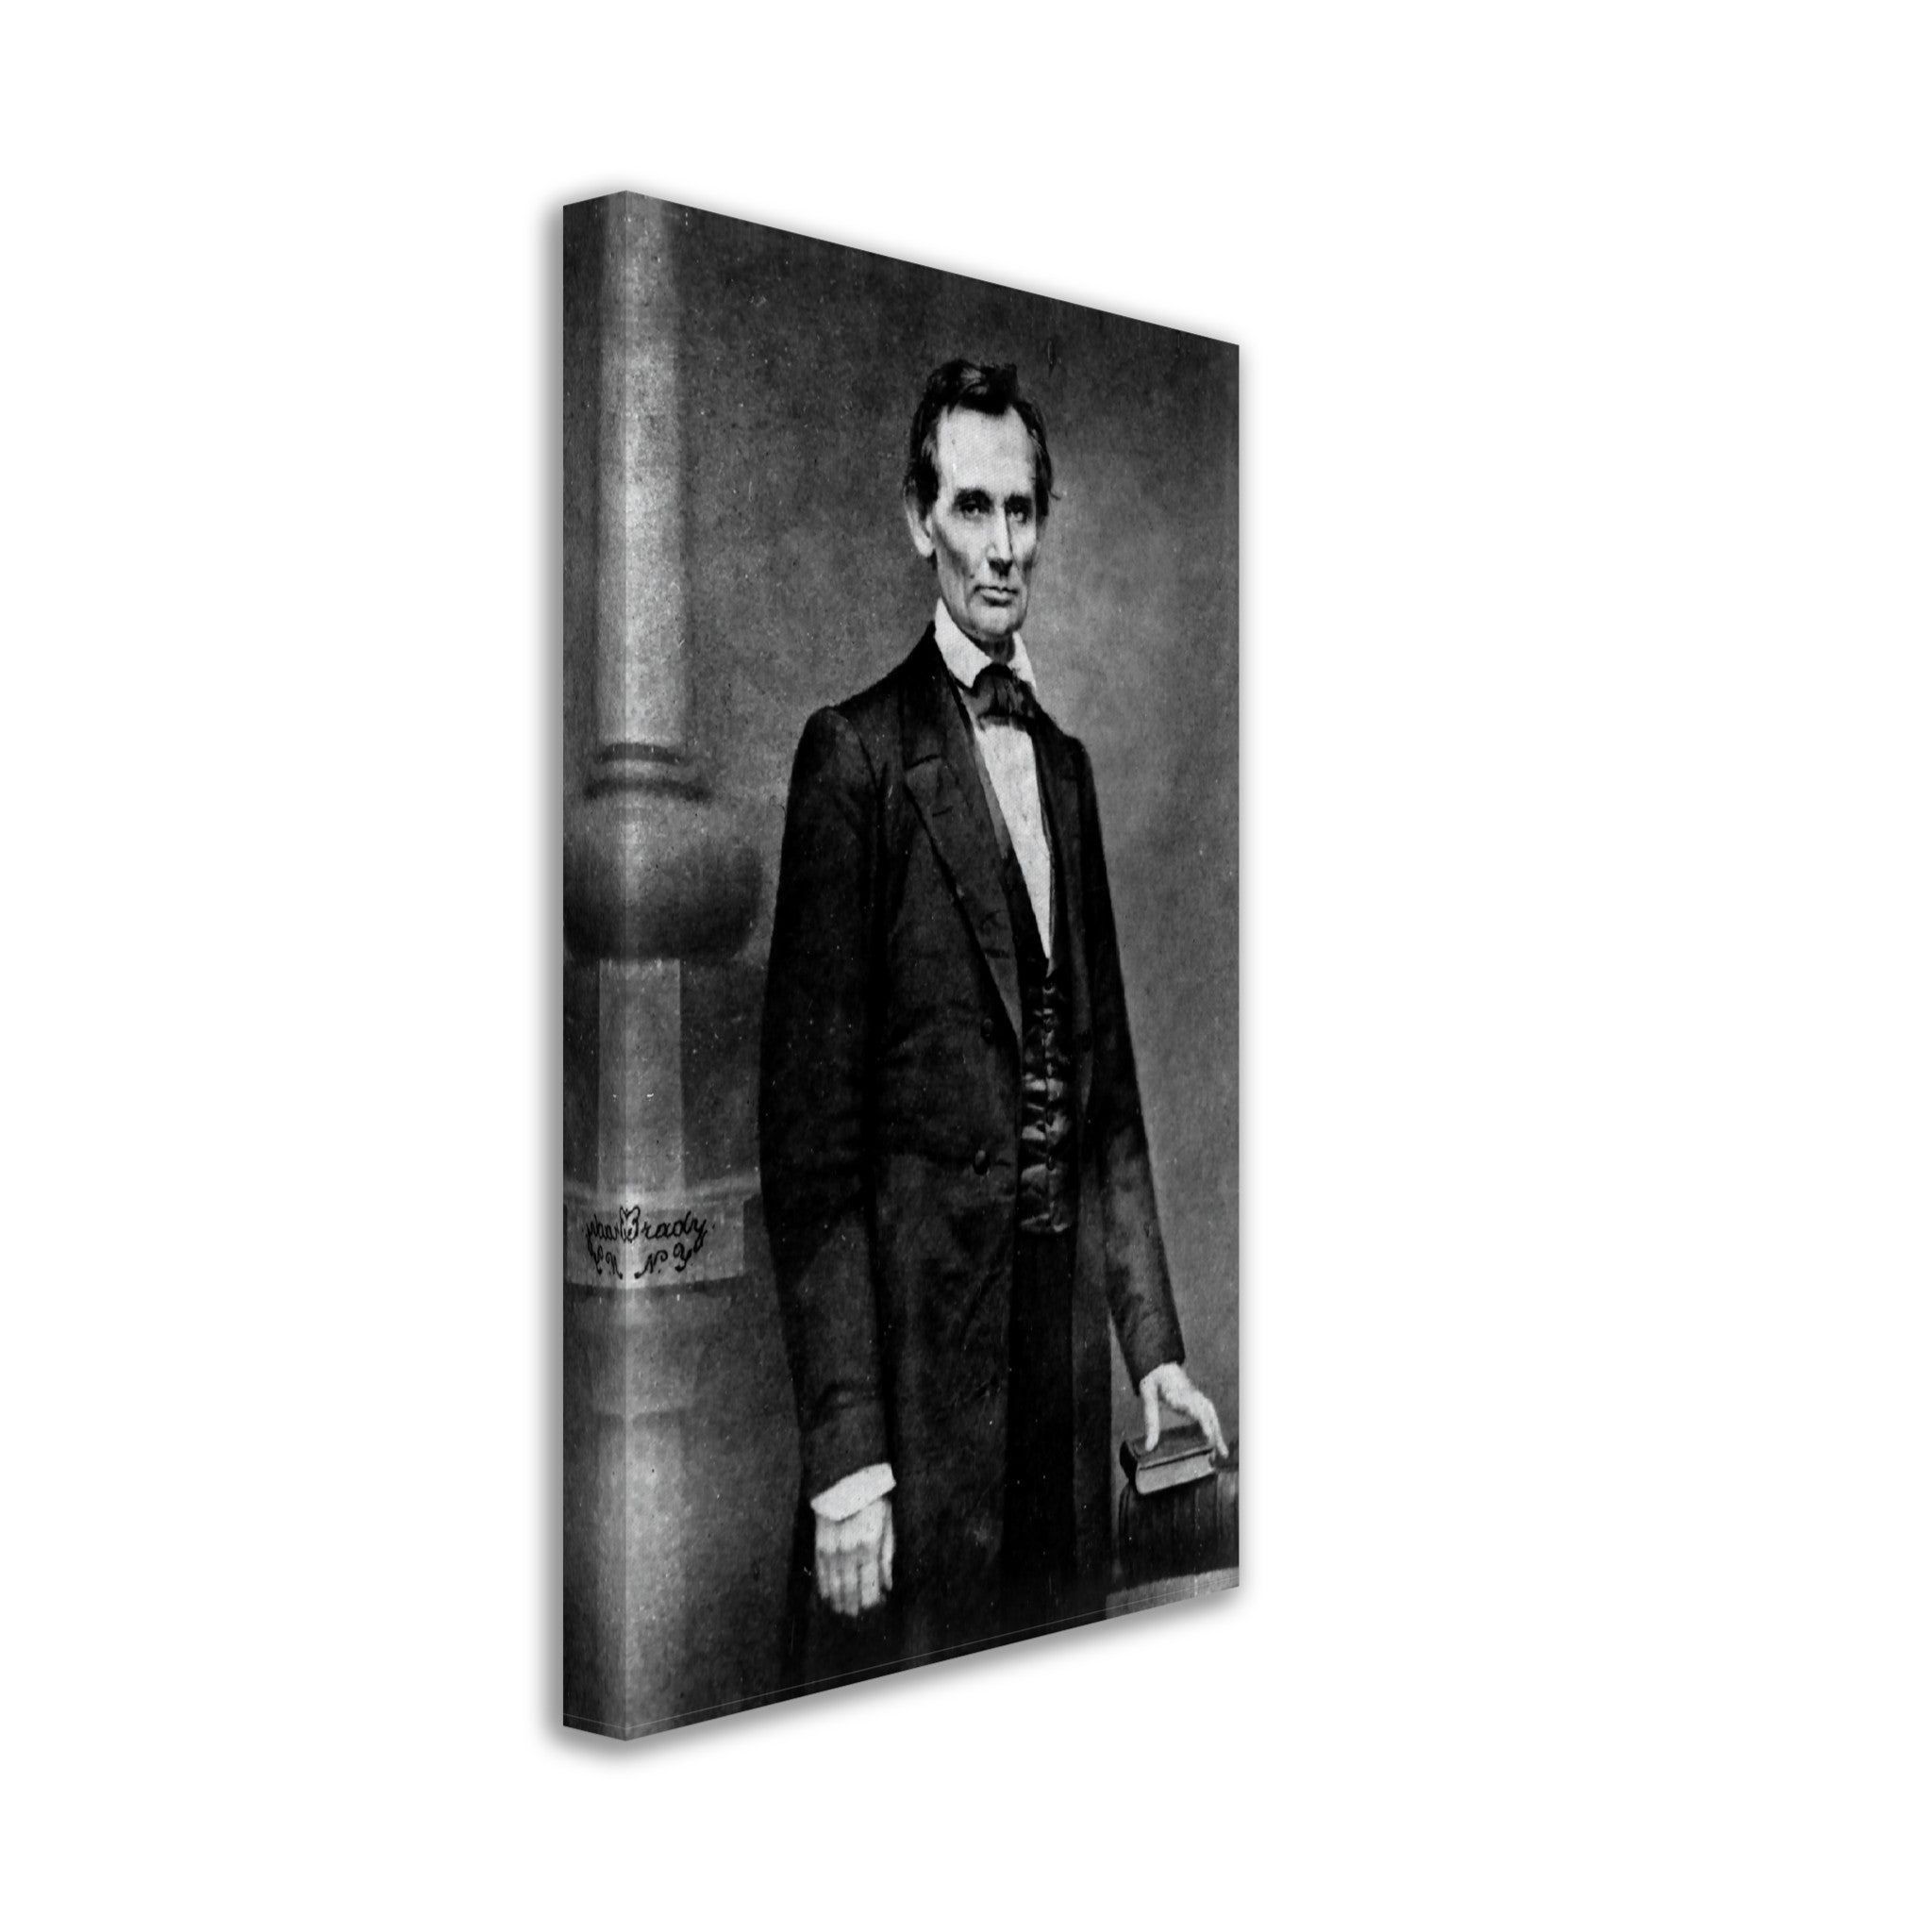 Abraham Lincoln Portrait Photo Canvas, Famous Canvas Print Photo From 1860, Photo That Propelled Lincoln To Greatness - WallArtPrints4U